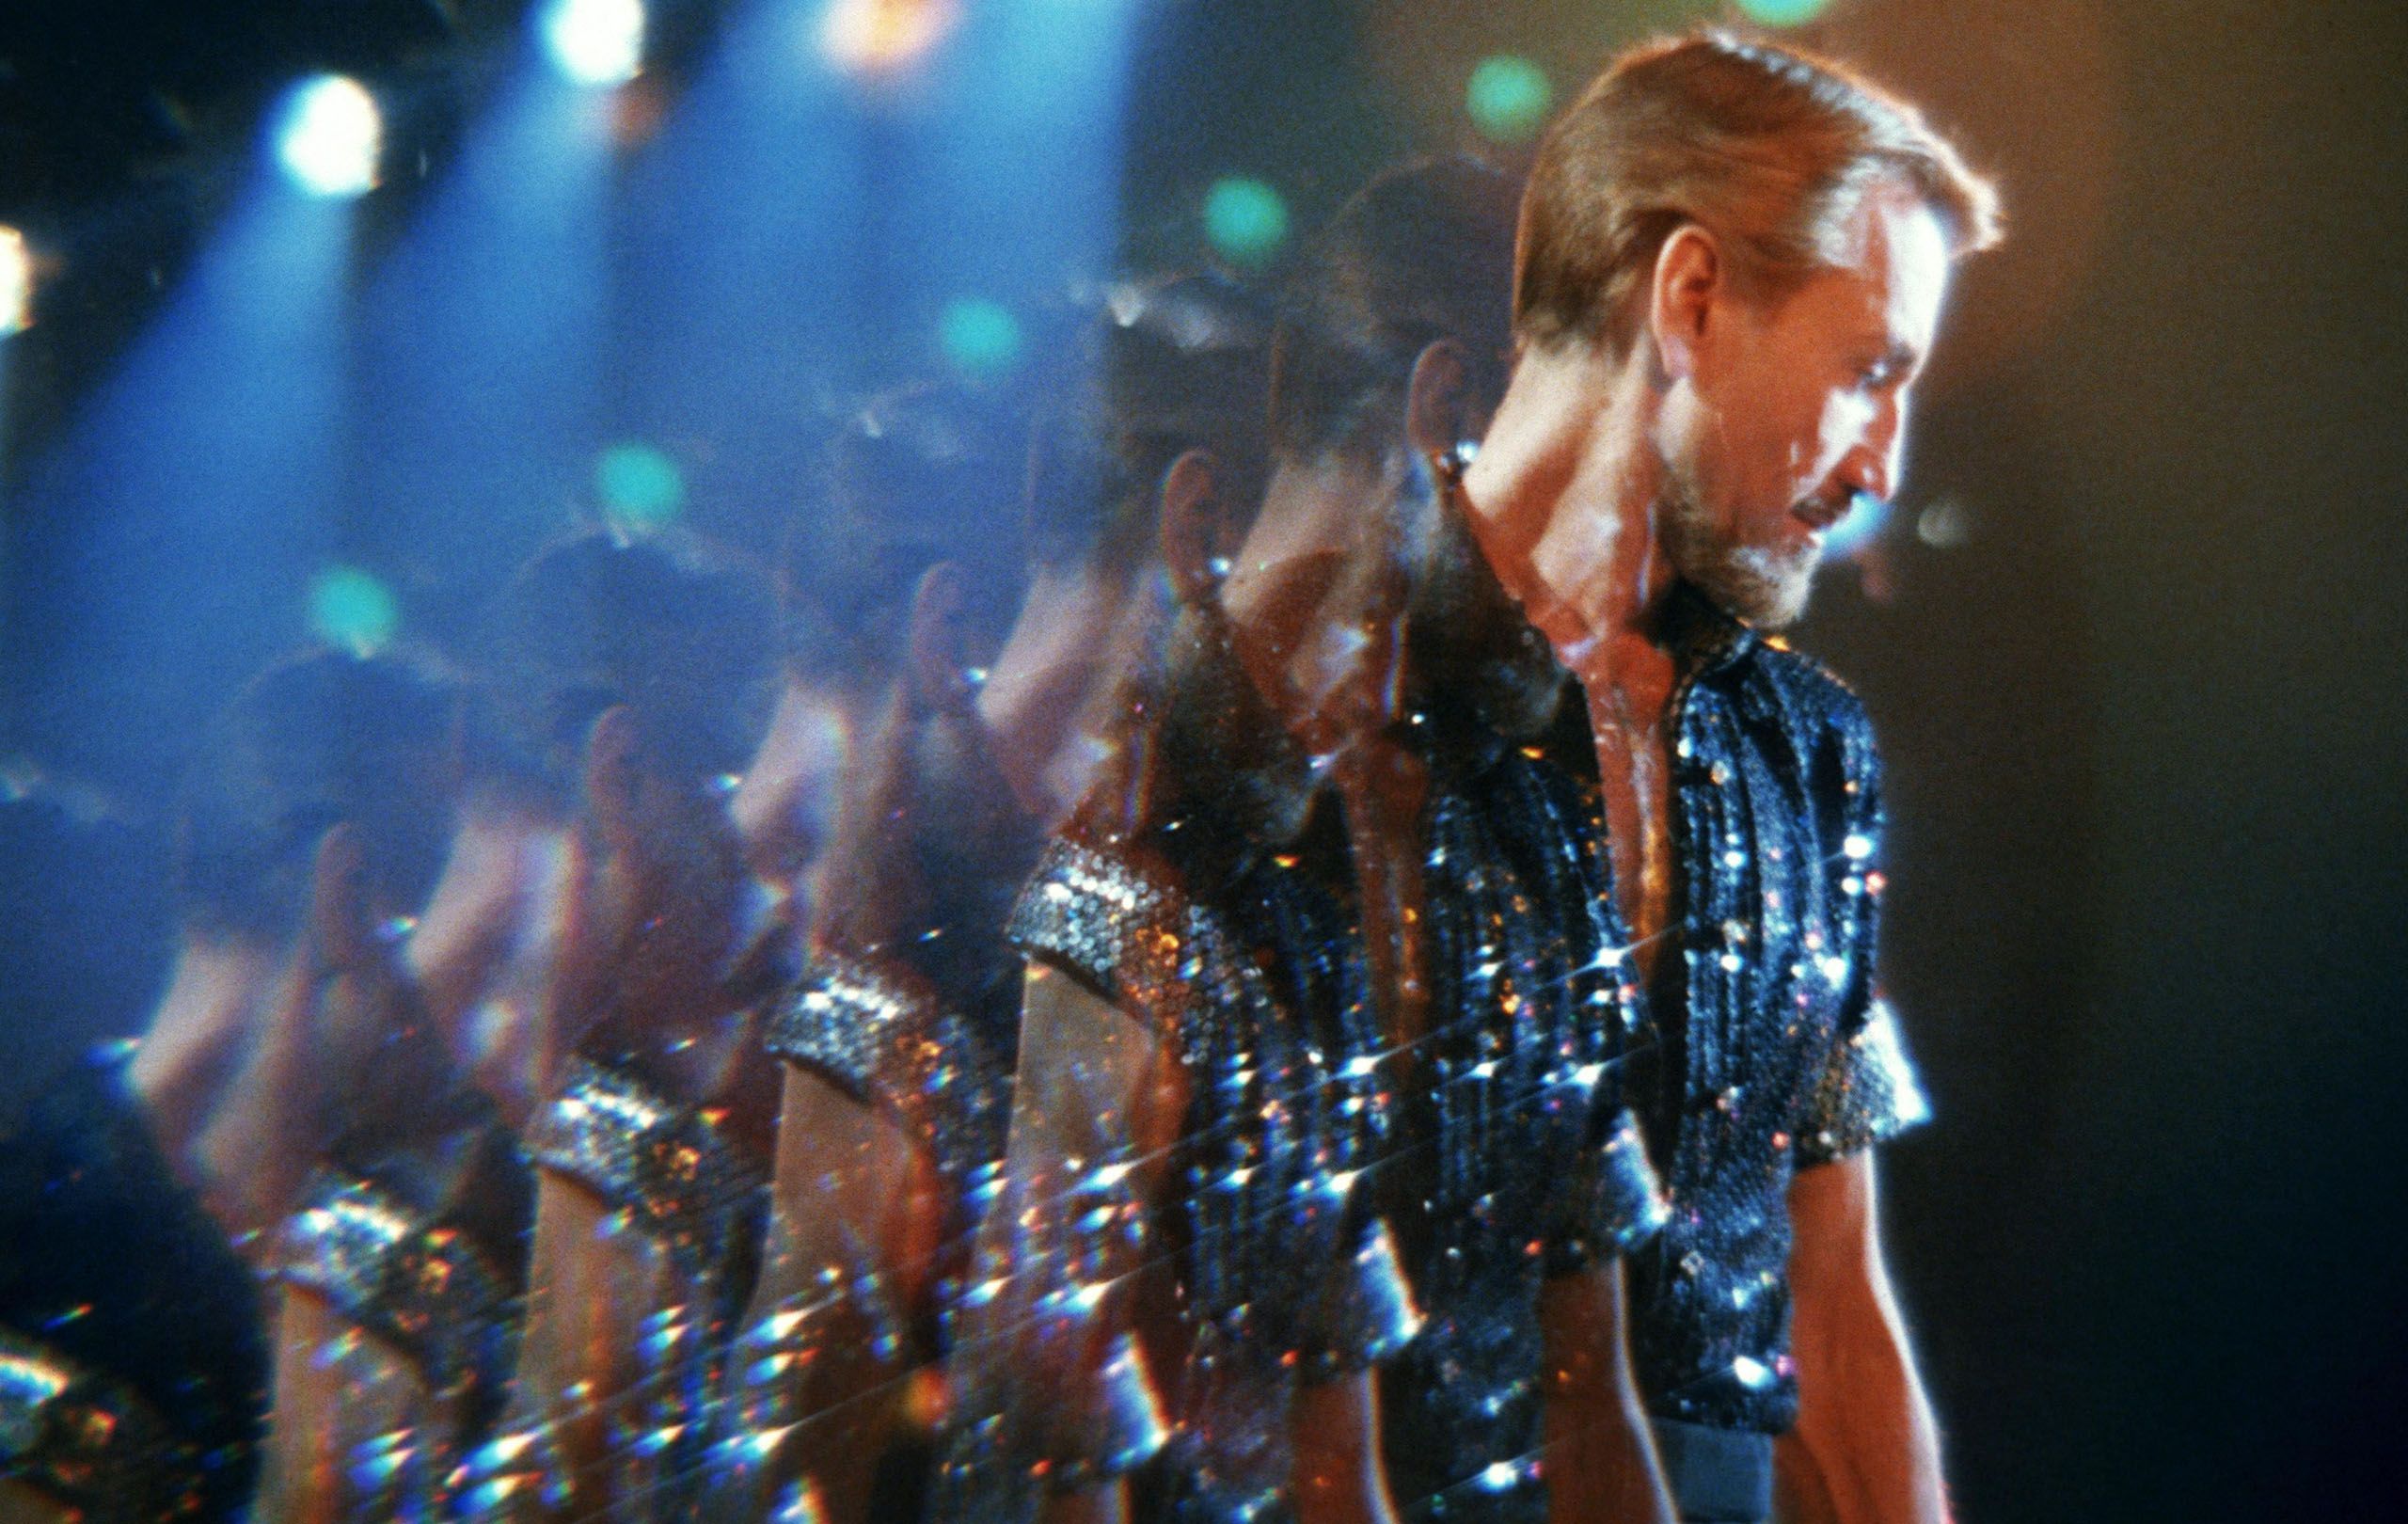 All that Jazz, the Musical Self-Portrait of Bob Fosse.